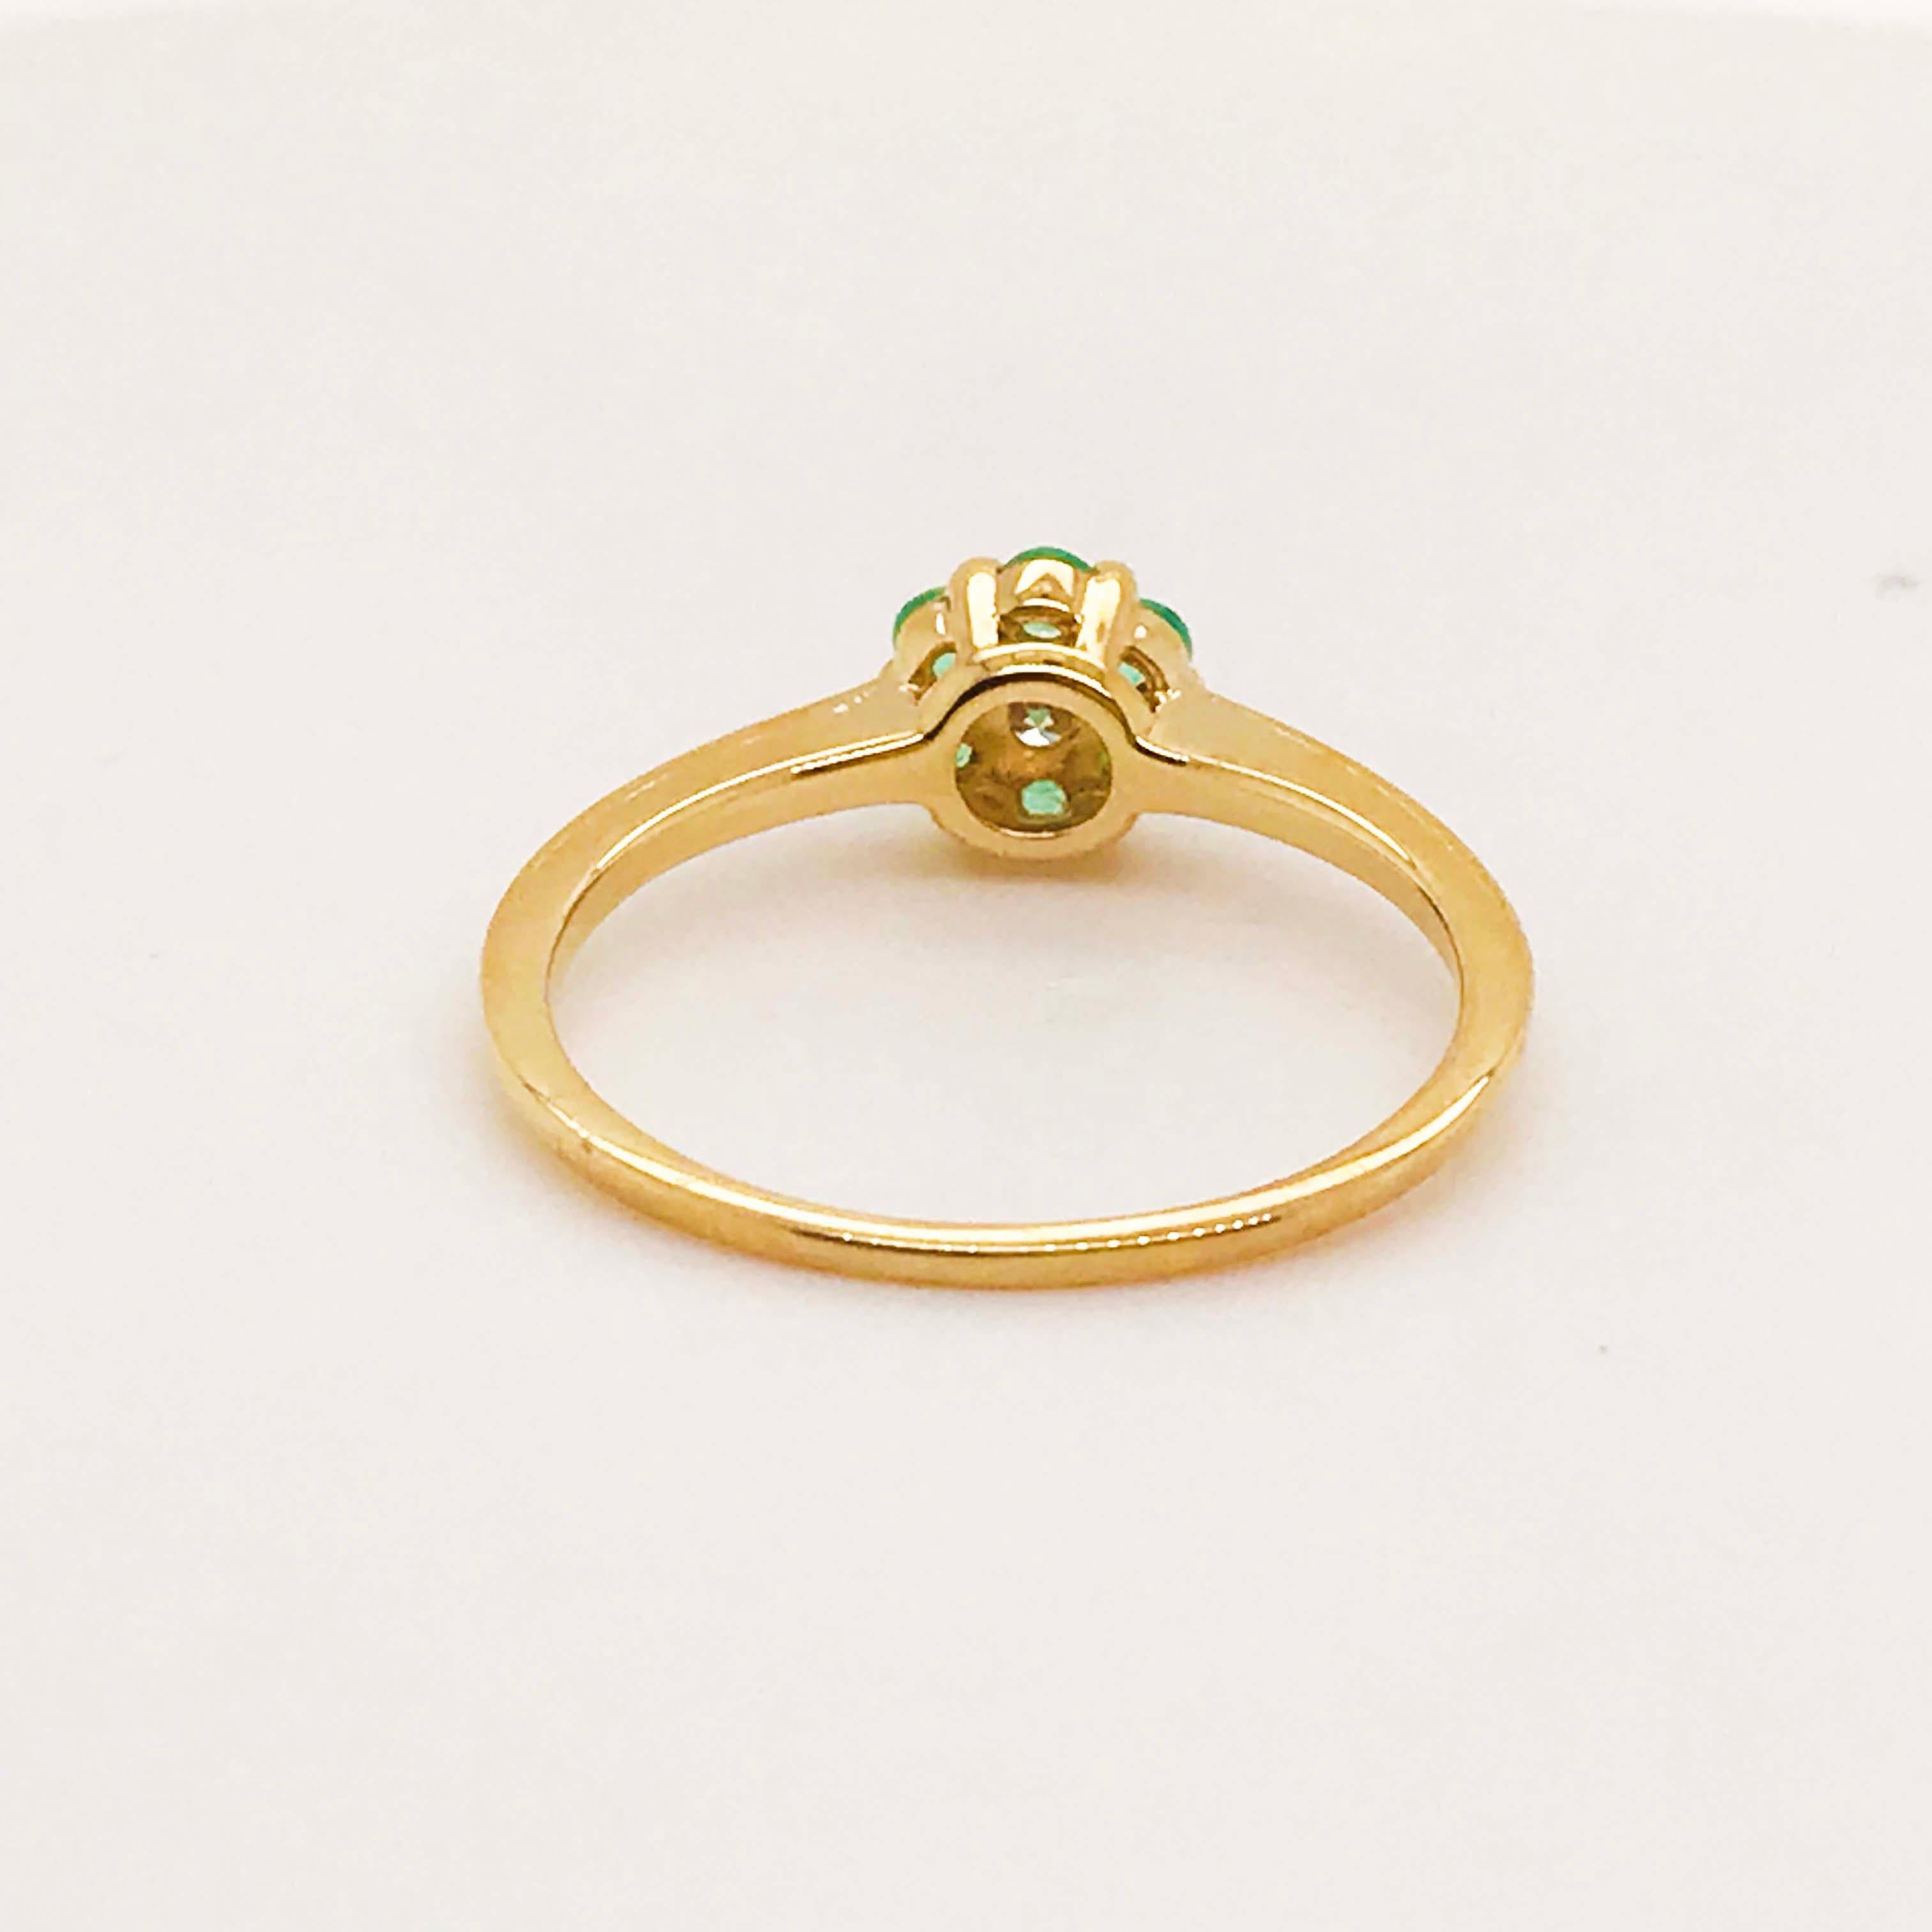 Women's Petite Emerald Flower Ring, May Birthstone with Diamond, 14K Yellow Gold Lv For Sale